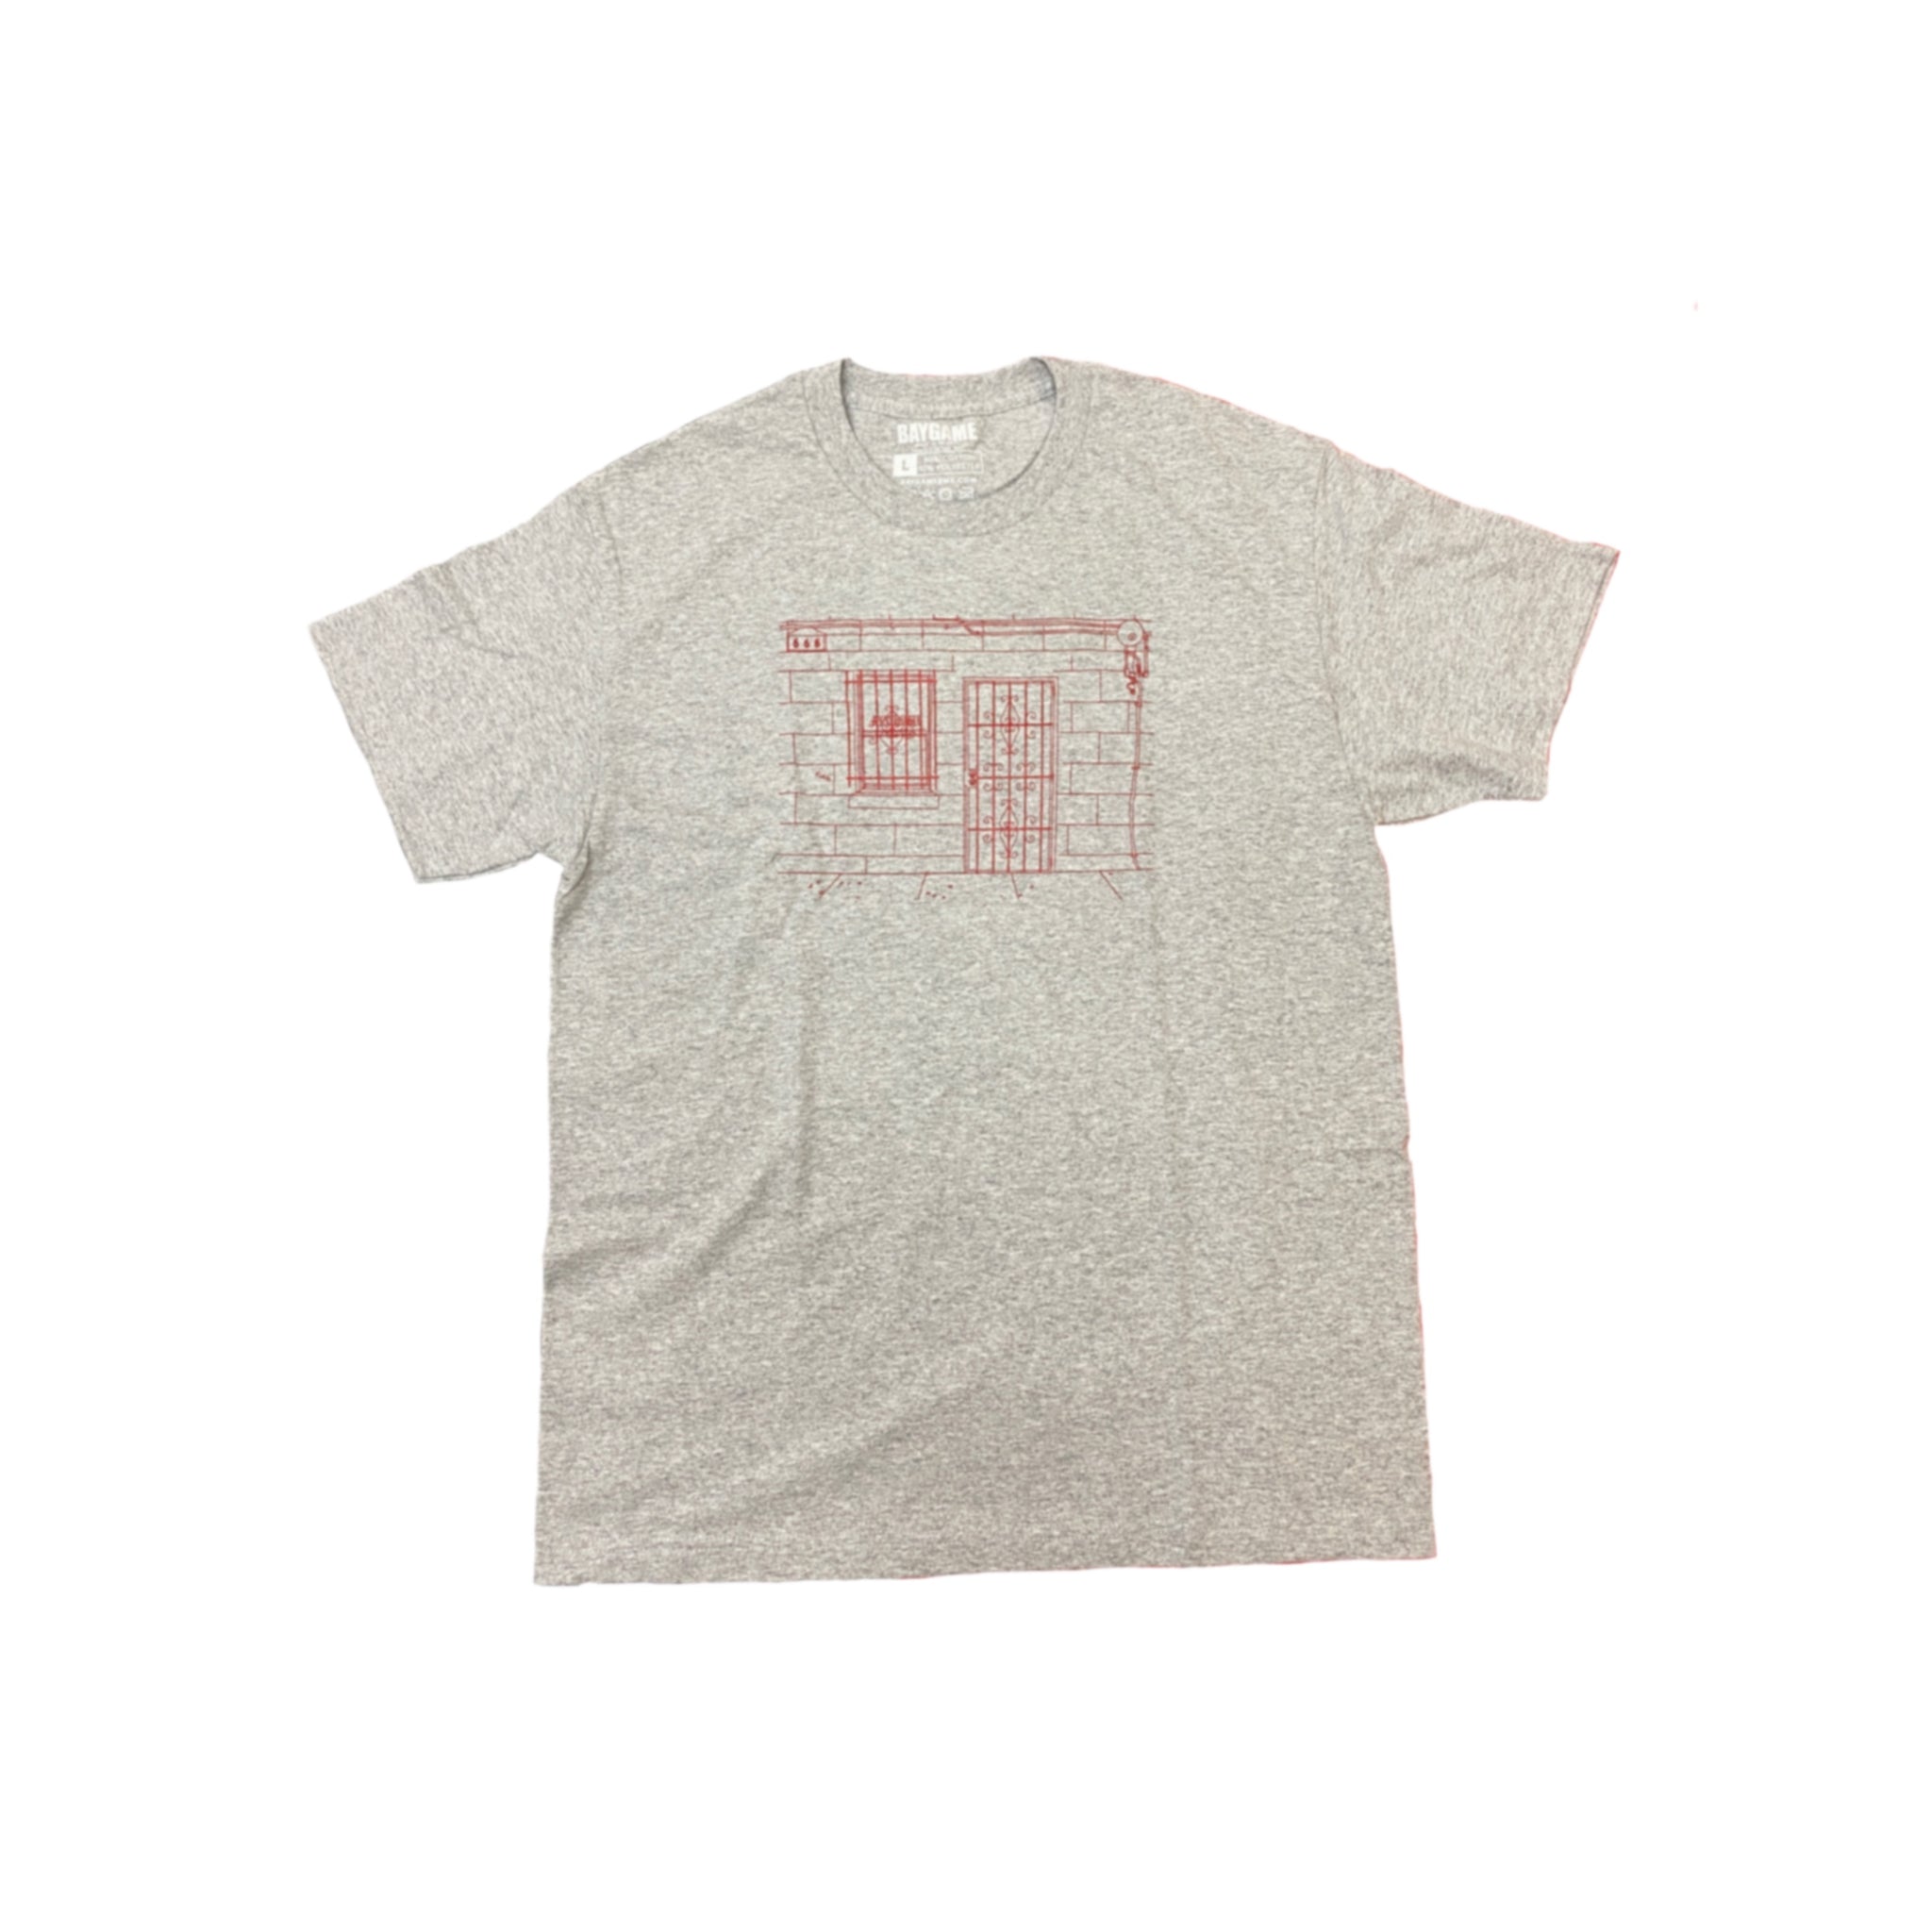 Baygame 665 Tee Grey/Red